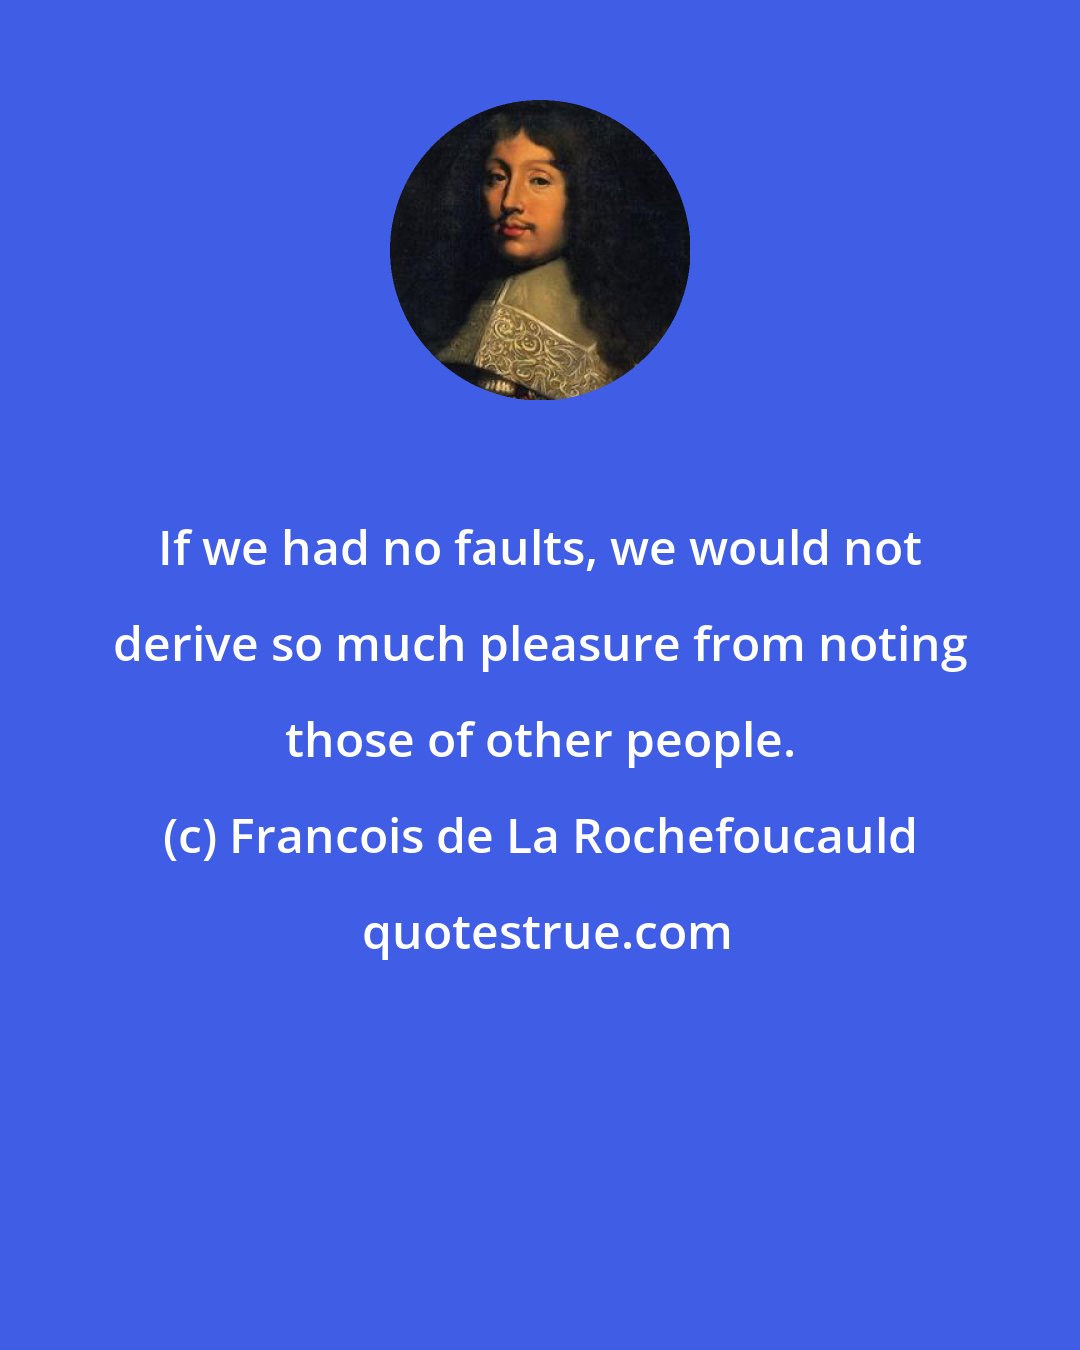 Francois de La Rochefoucauld: If we had no faults, we would not derive so much pleasure from noting those of other people.